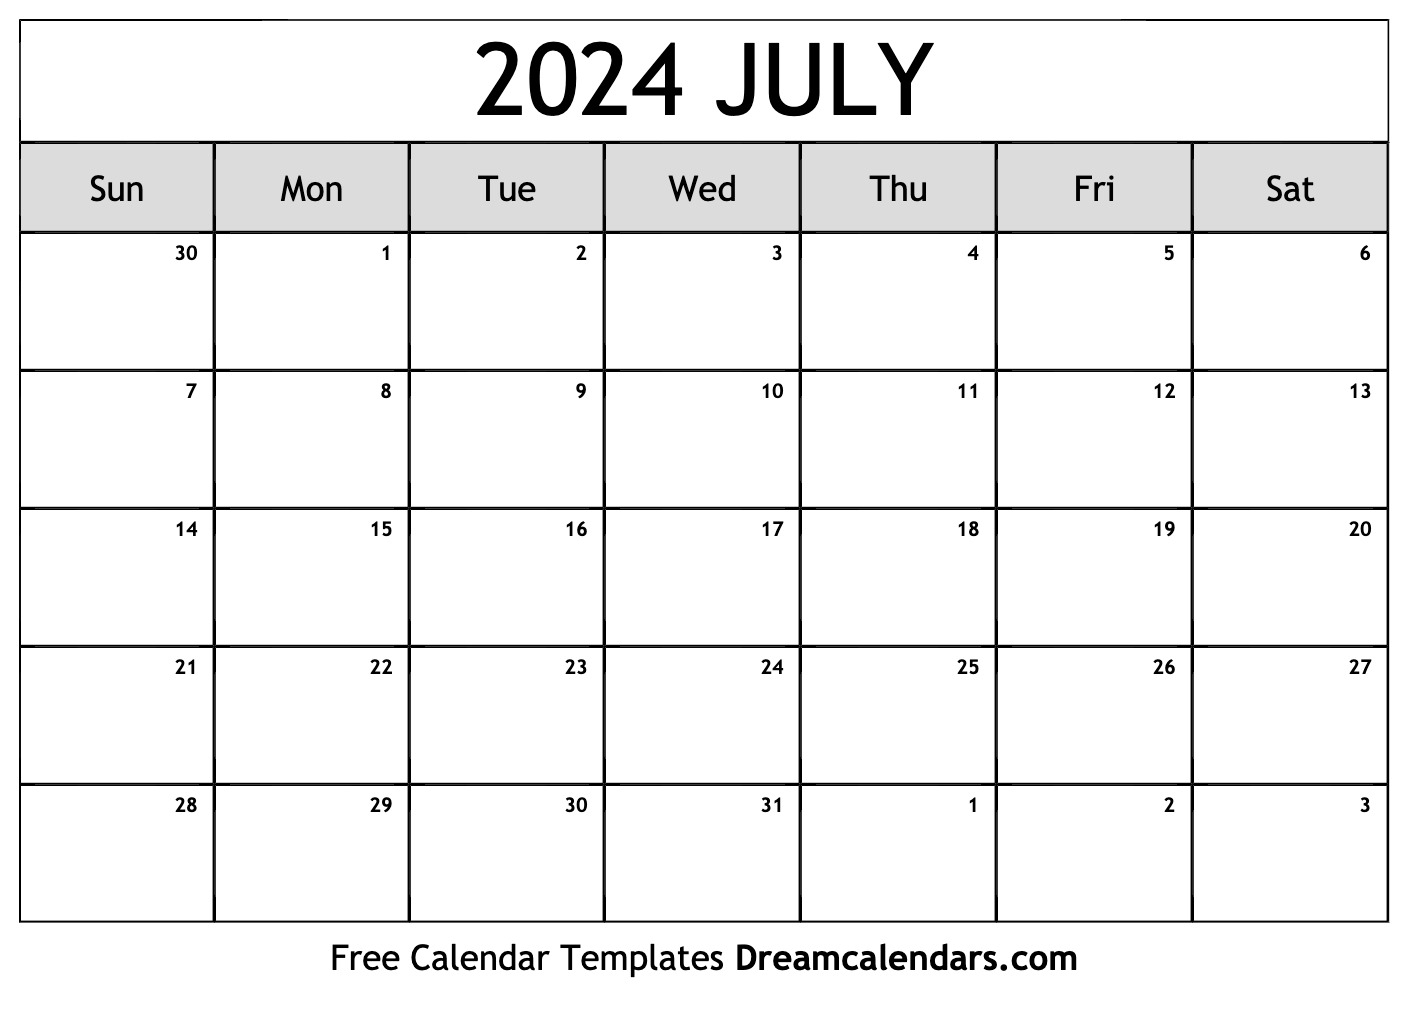 July 2024 Calendar | Free Blank Printable With Holidays for July Free Printable Calendar 2024